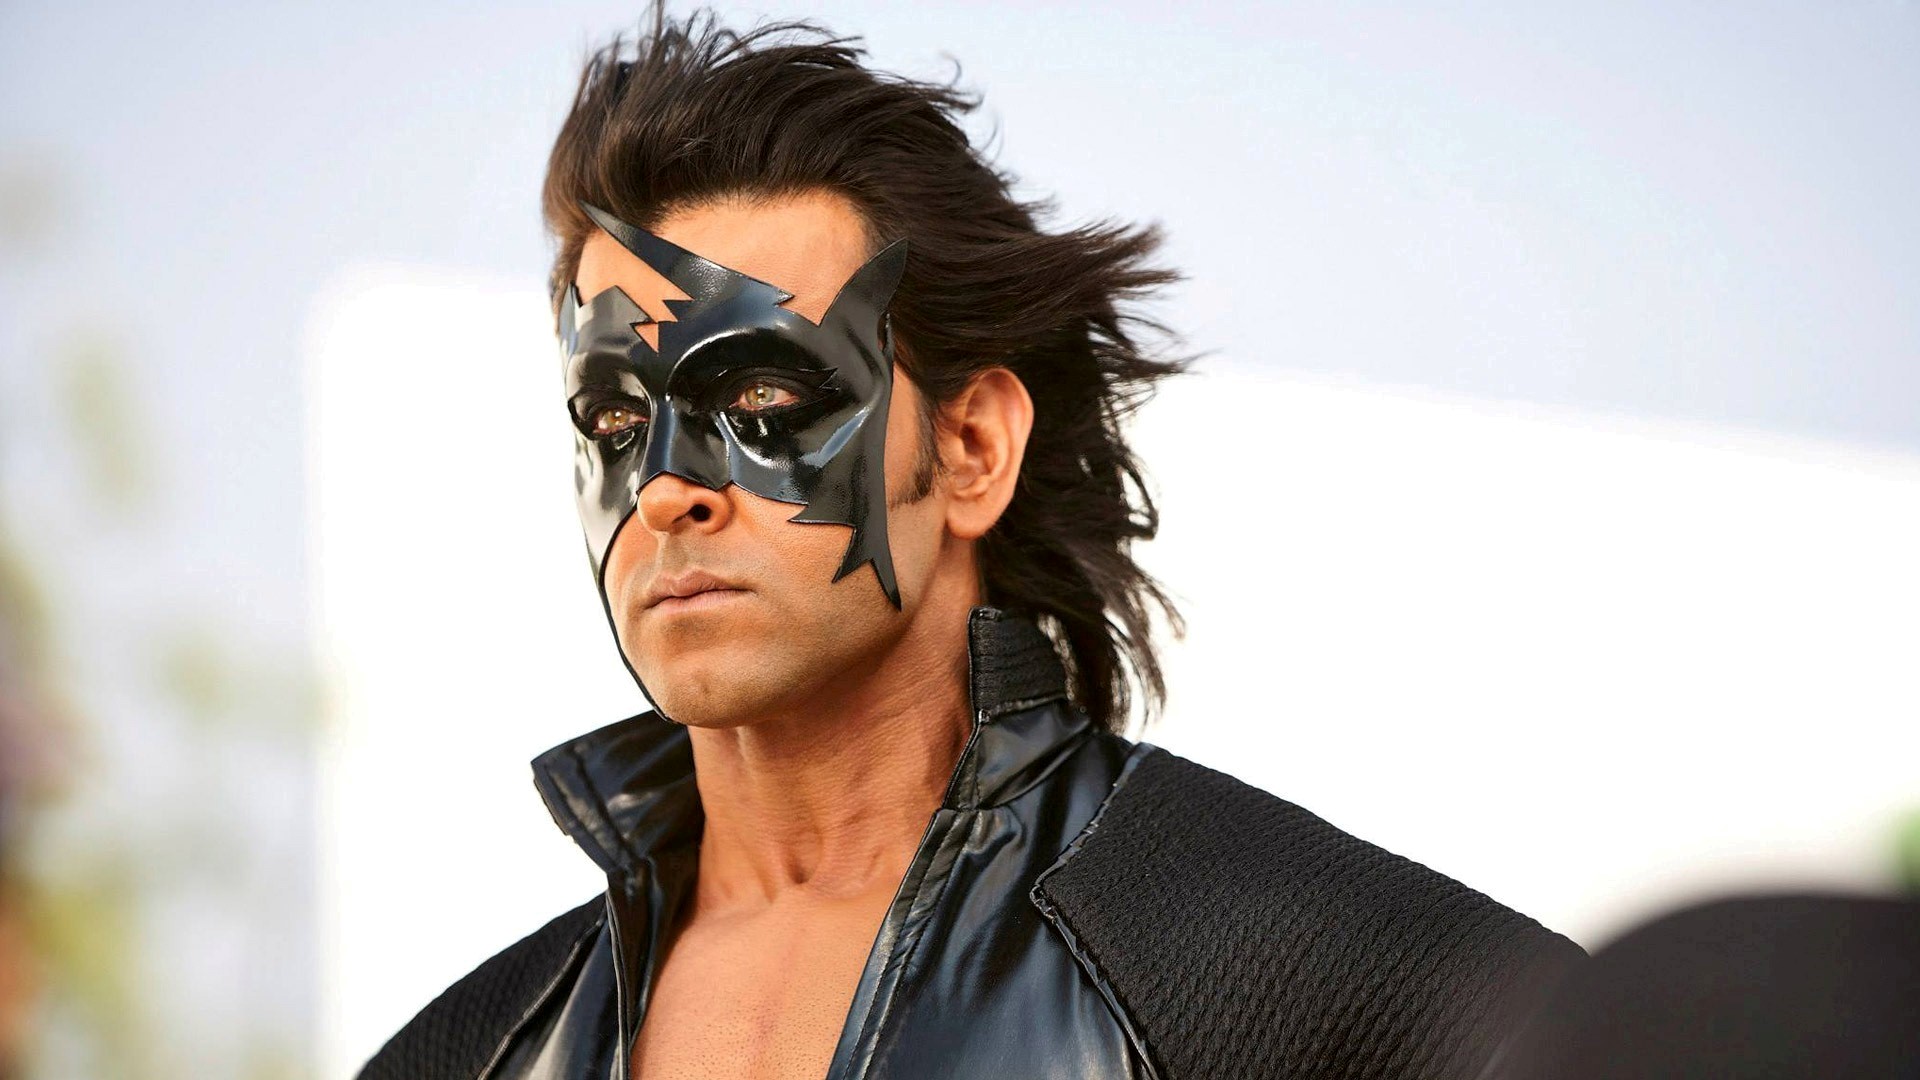 Hrithik Roshan Wallpapers HD Pictures | One HD Wallpaper Pictures ...